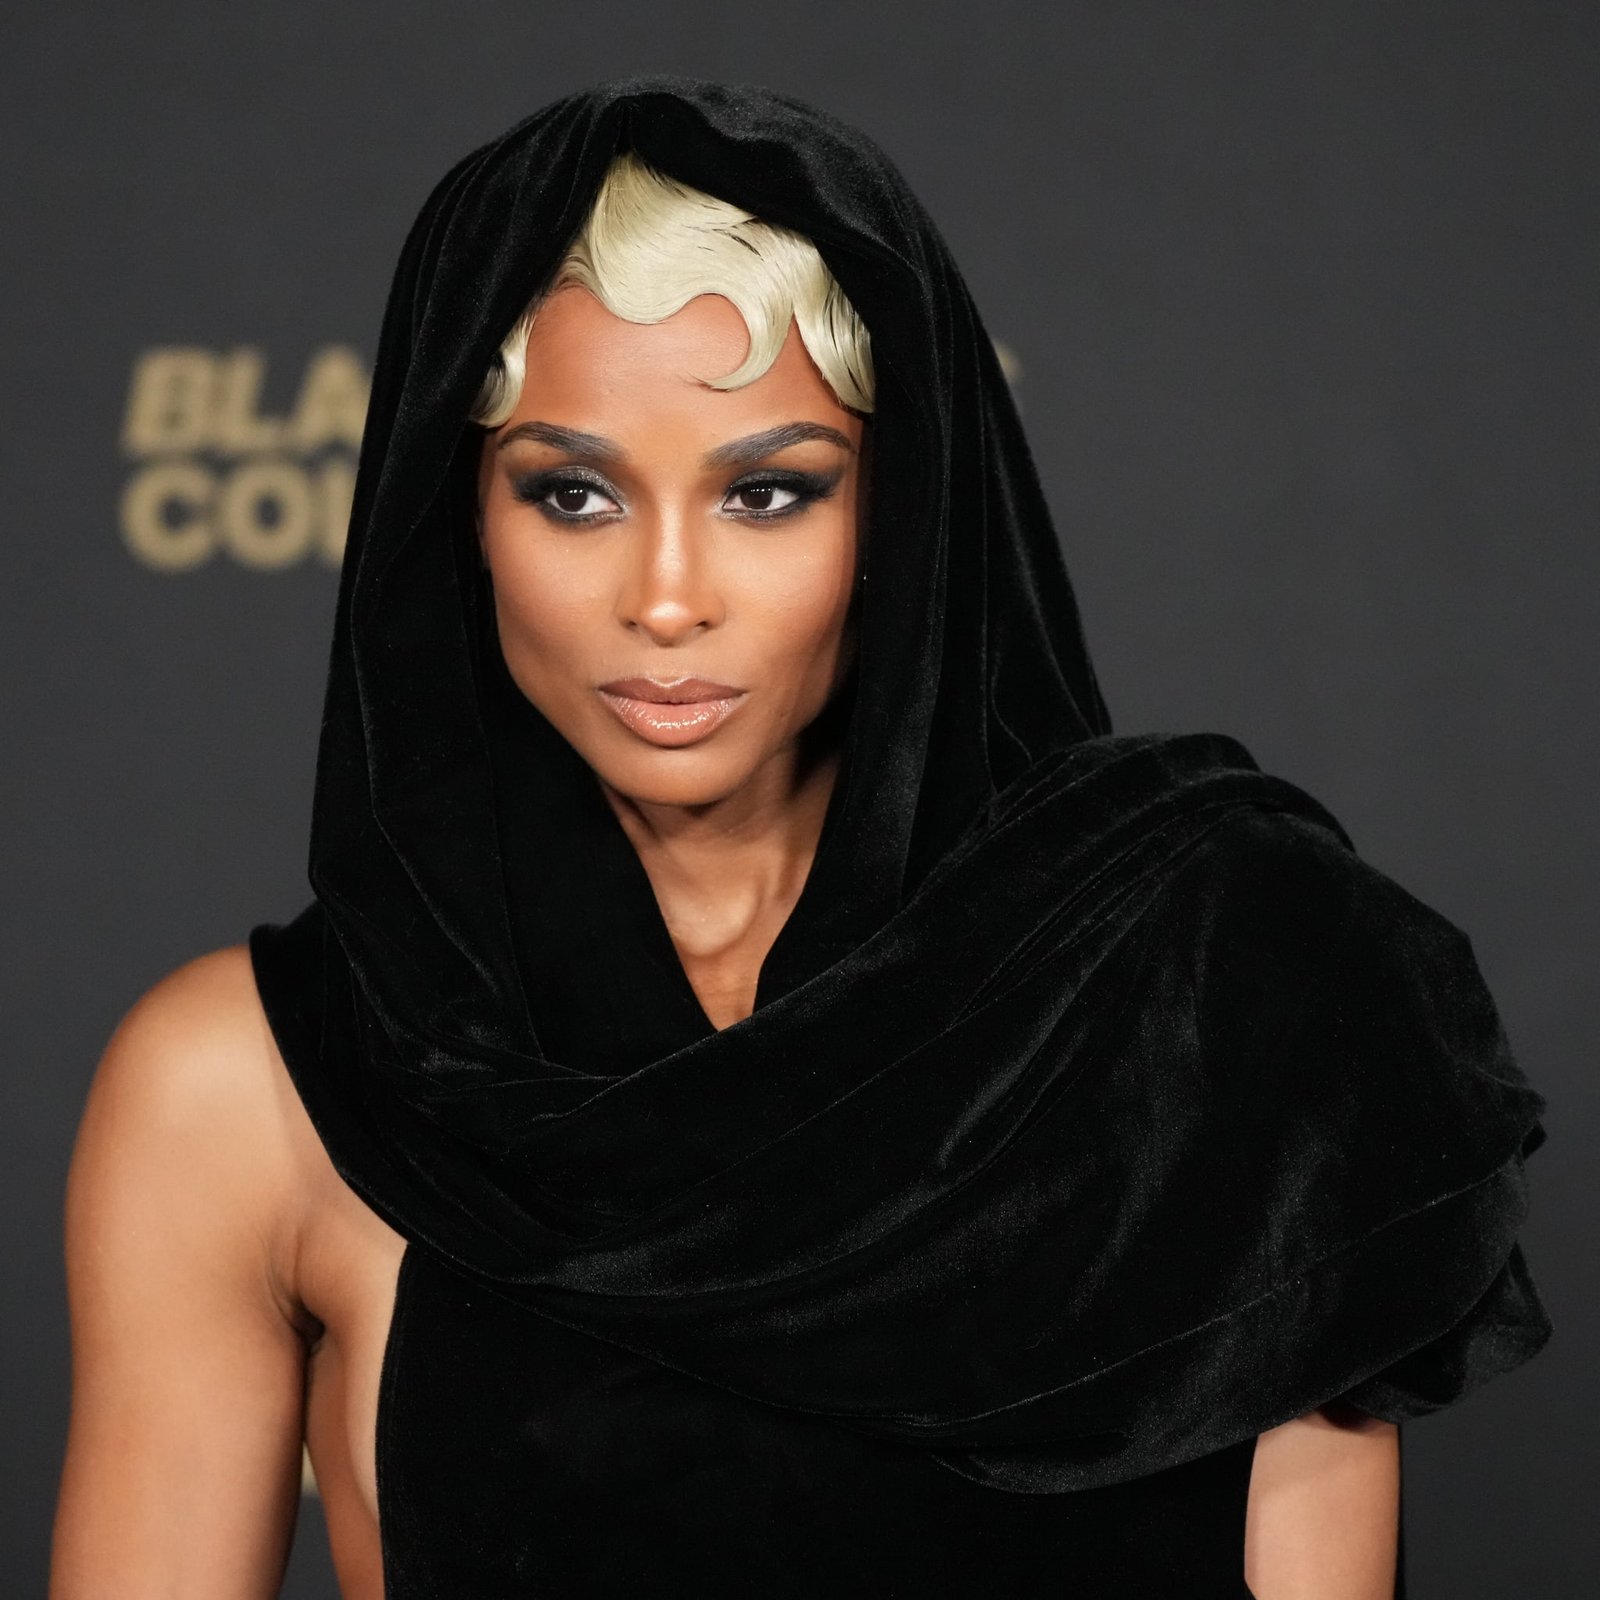 Check out pics of Ciara in custom Kwame Adusei gown